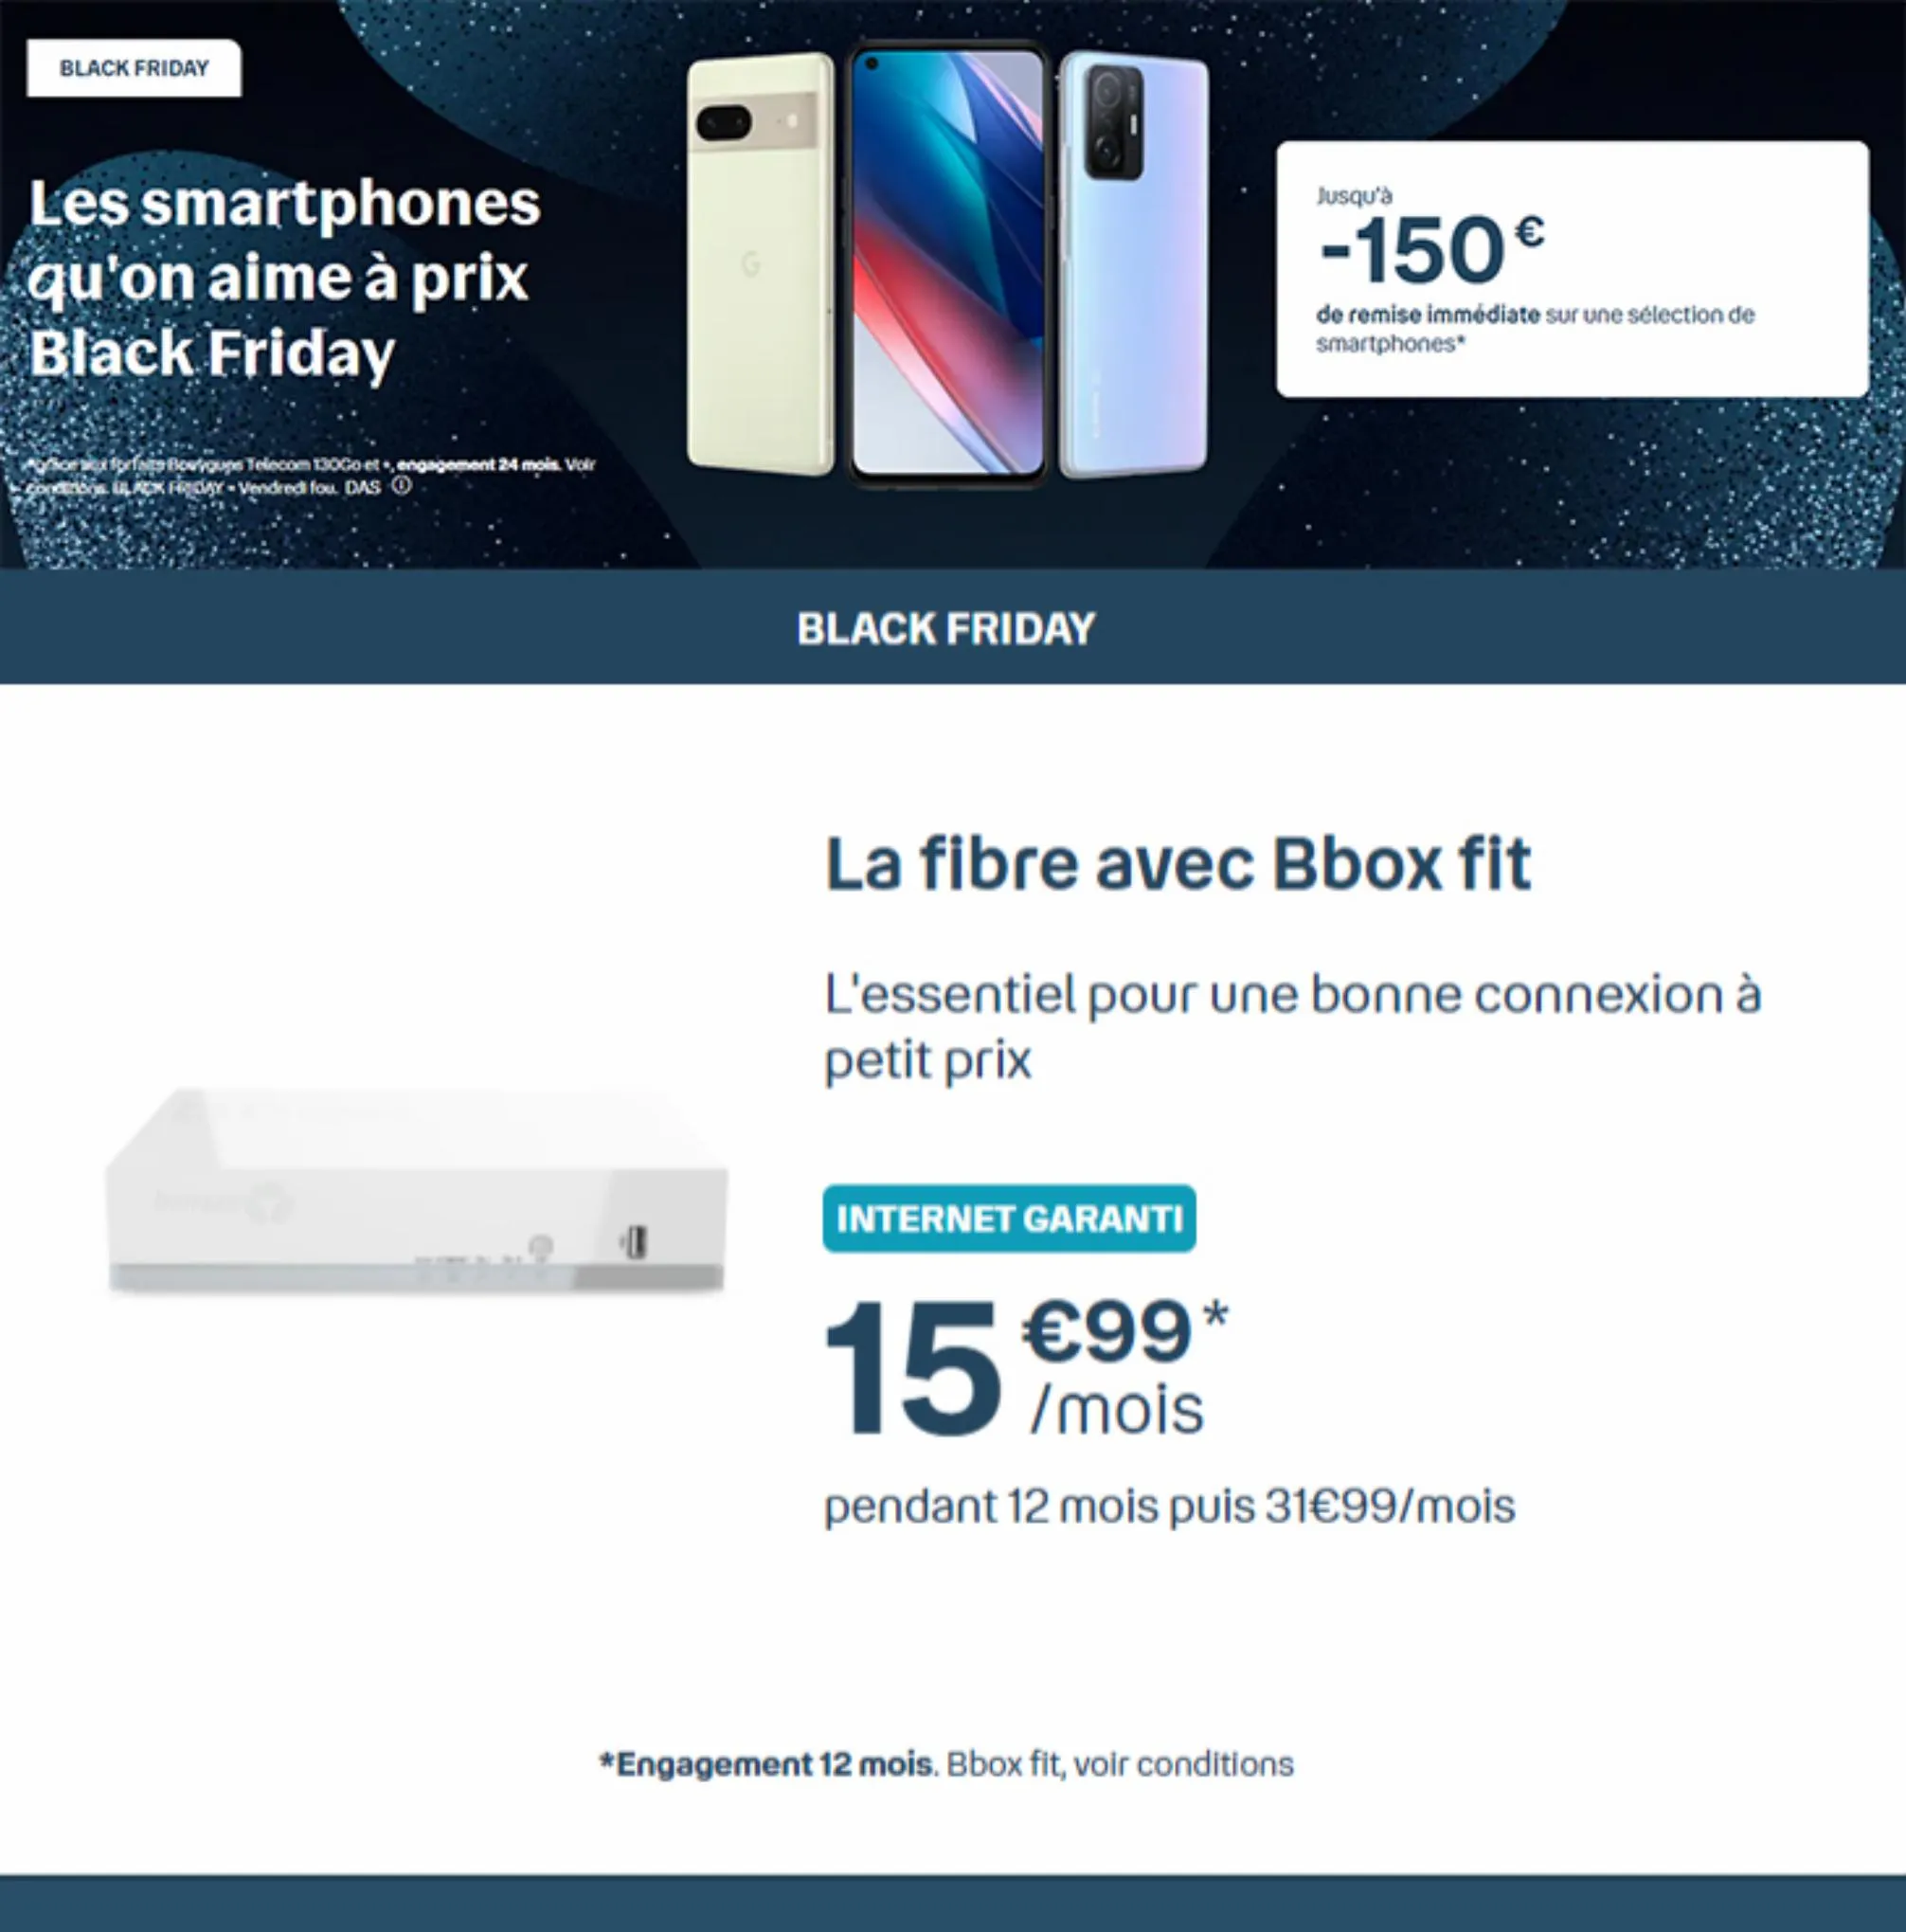 Catalogue Offres Bouygues Telecom Black Friday, page 00005